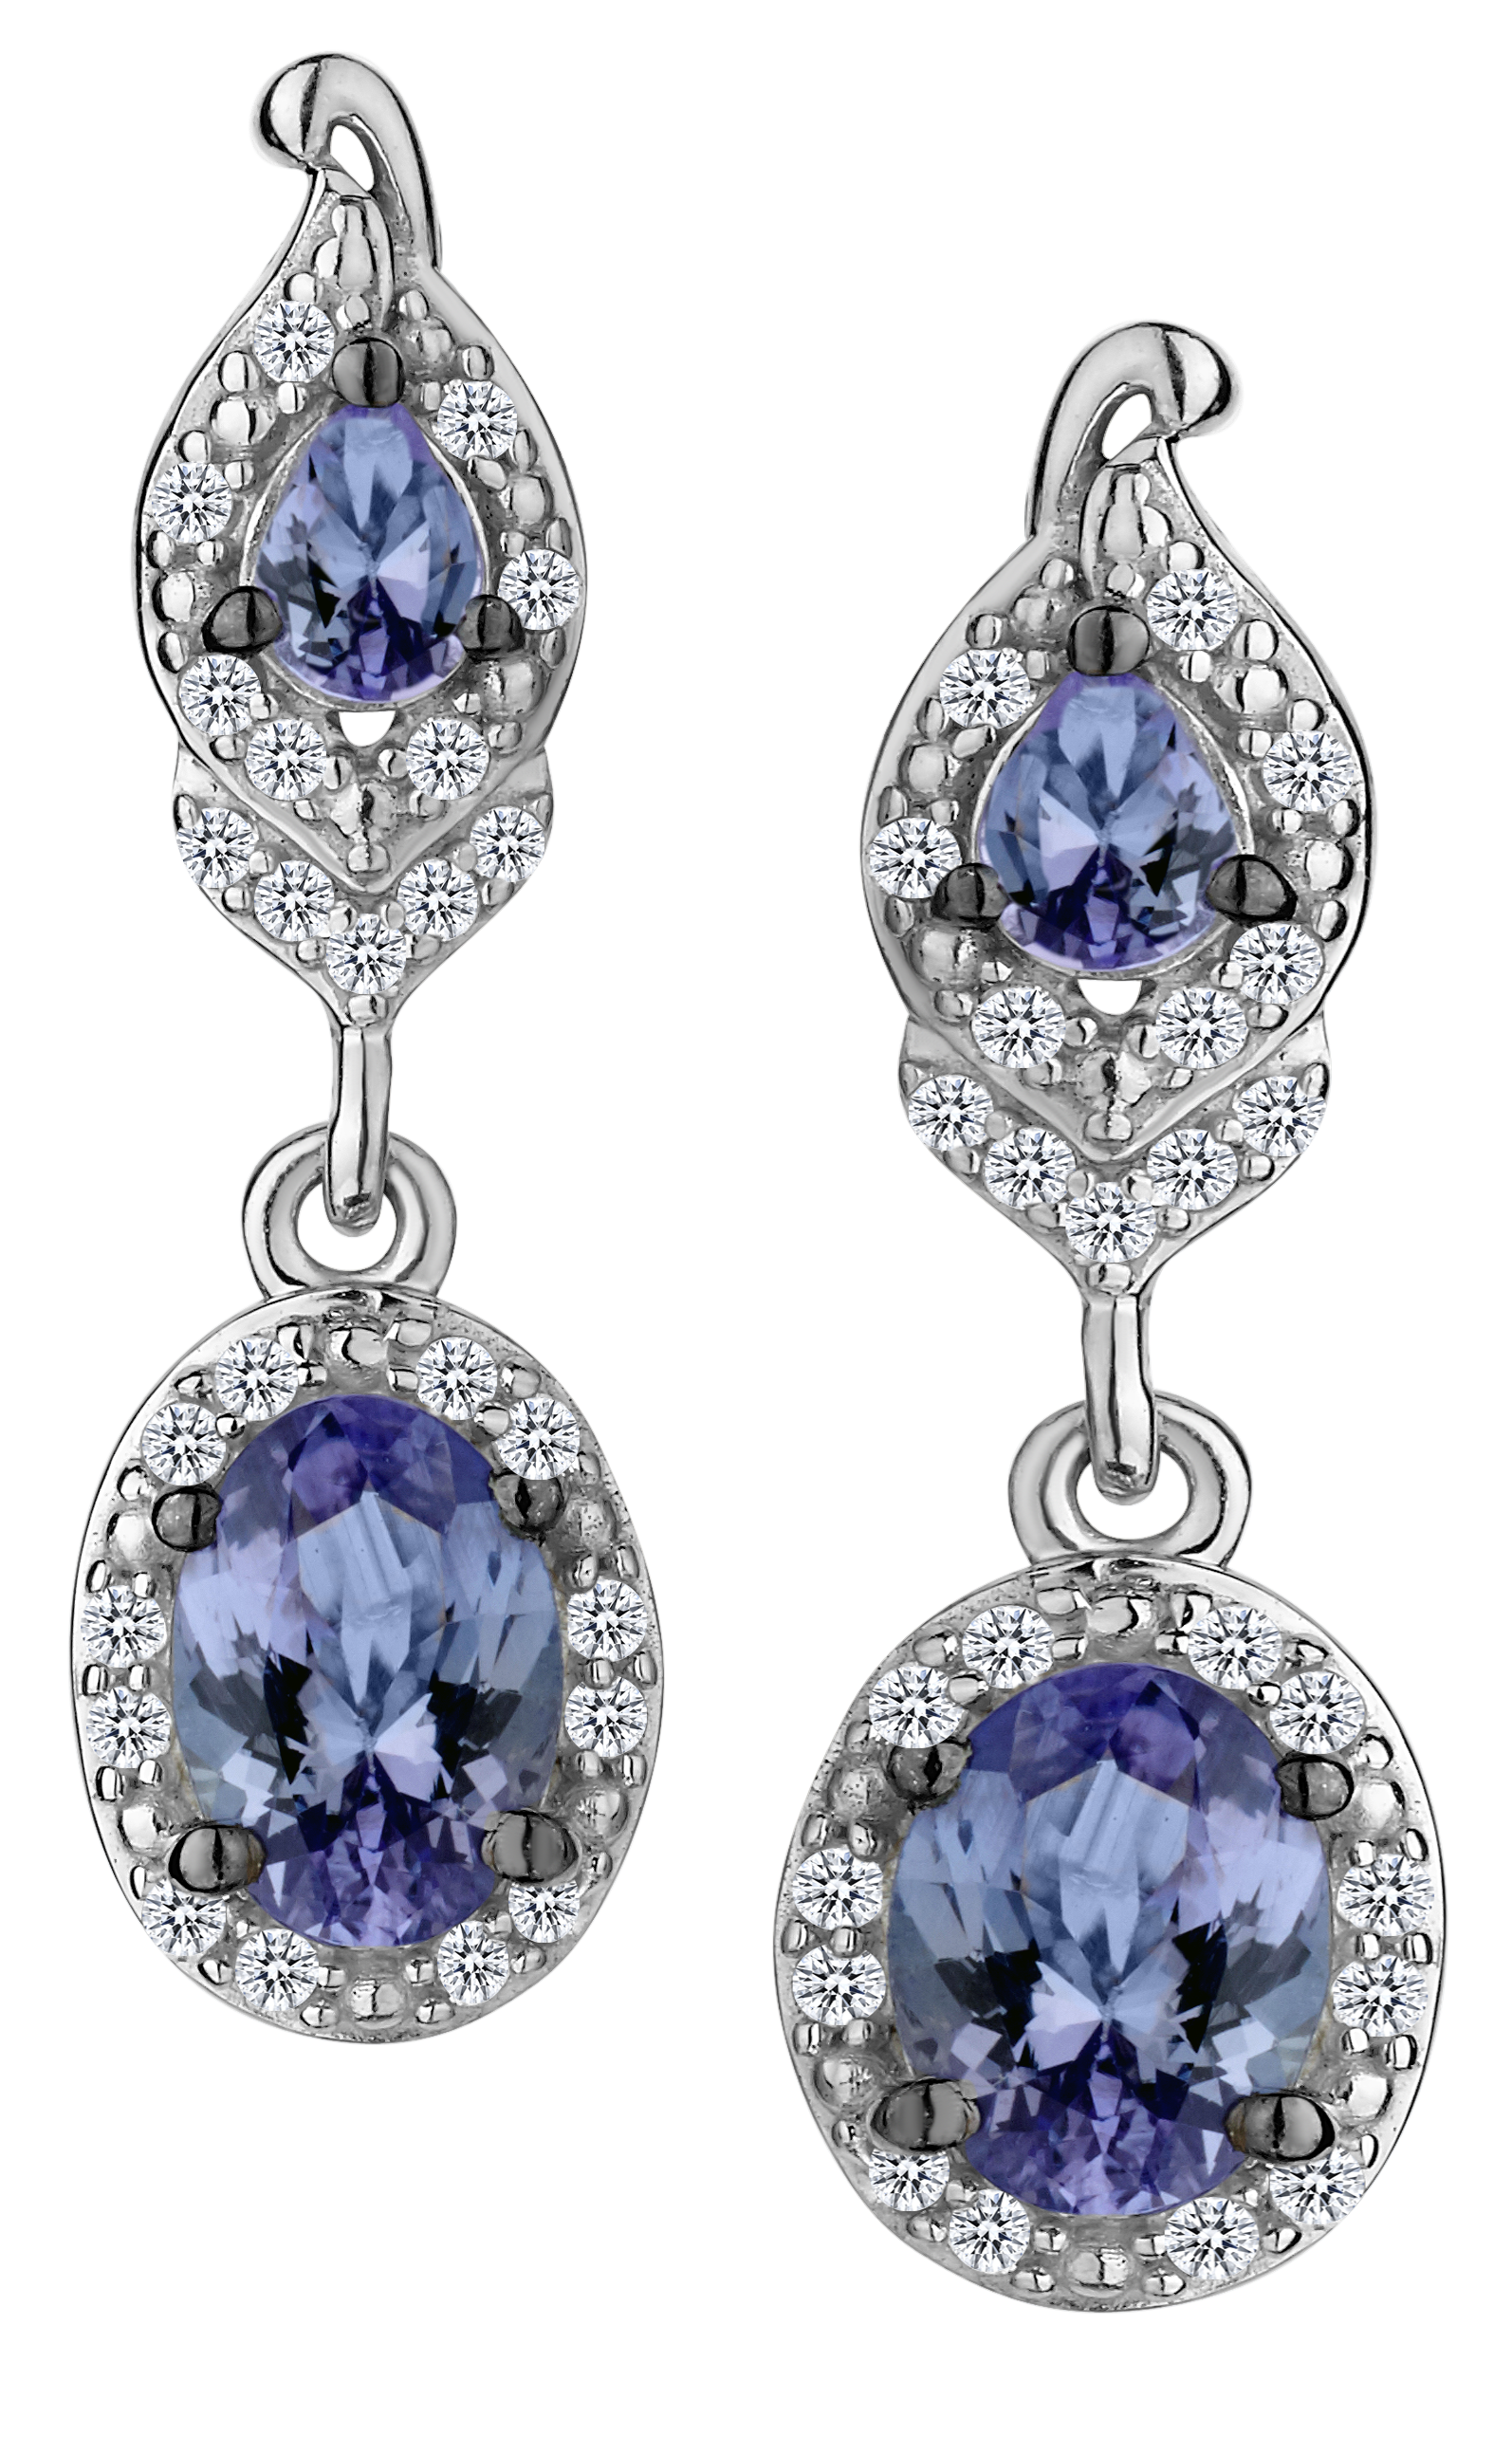 2.46 Carat Genuine Tanzanite and White Topaz Drop Earrings,  Sterling Silver. Griffin Jewellery Designs